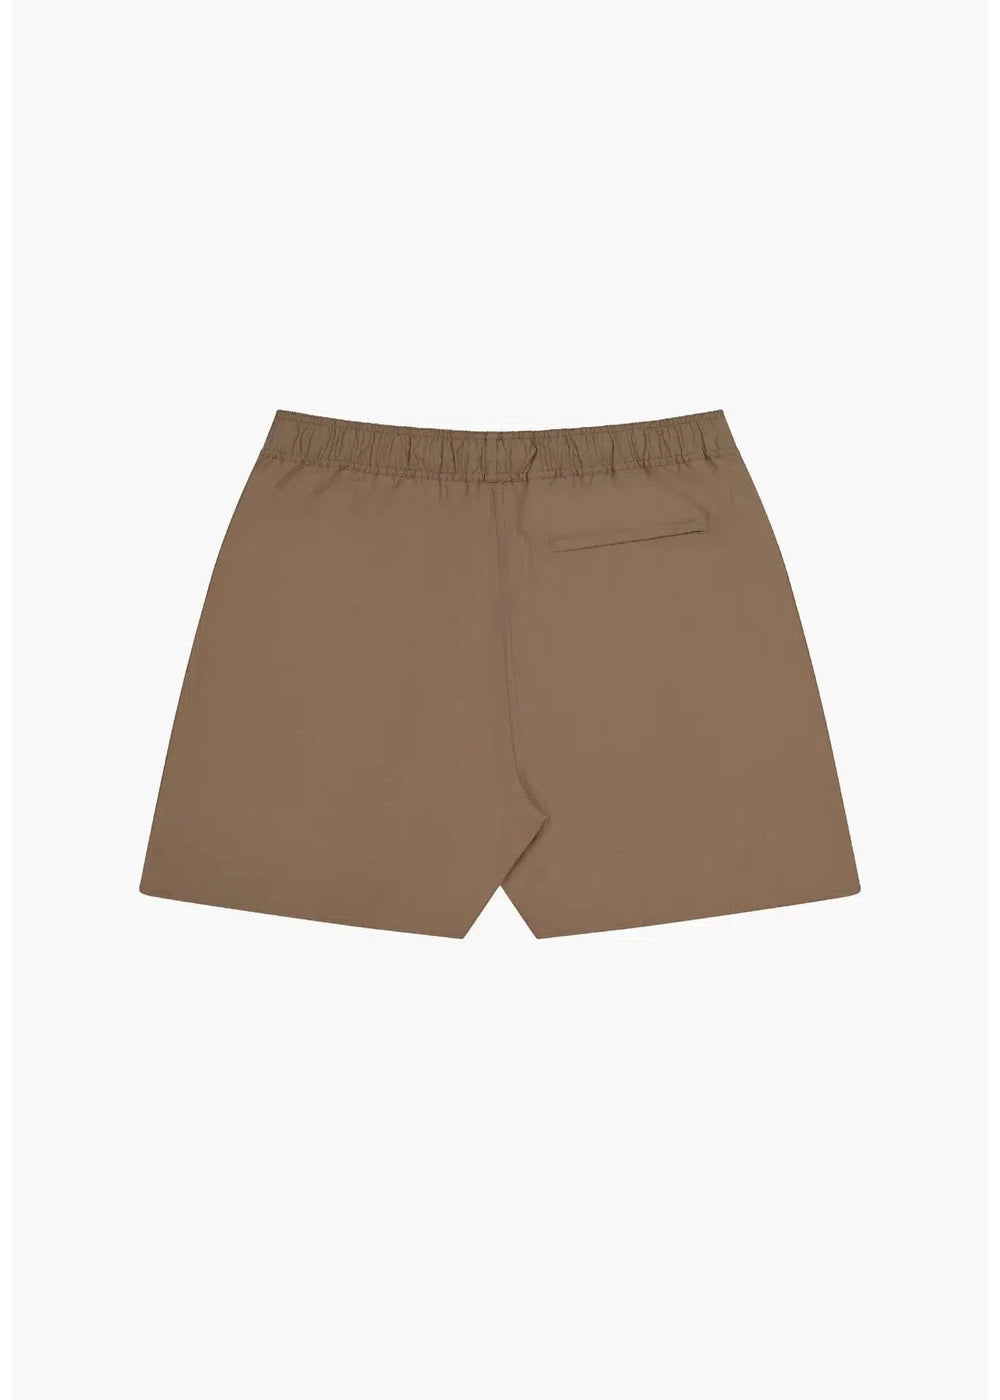 SATURDAY SHORTS / BROWN | PORTER JAMES SPORTS | Mad About The Boy